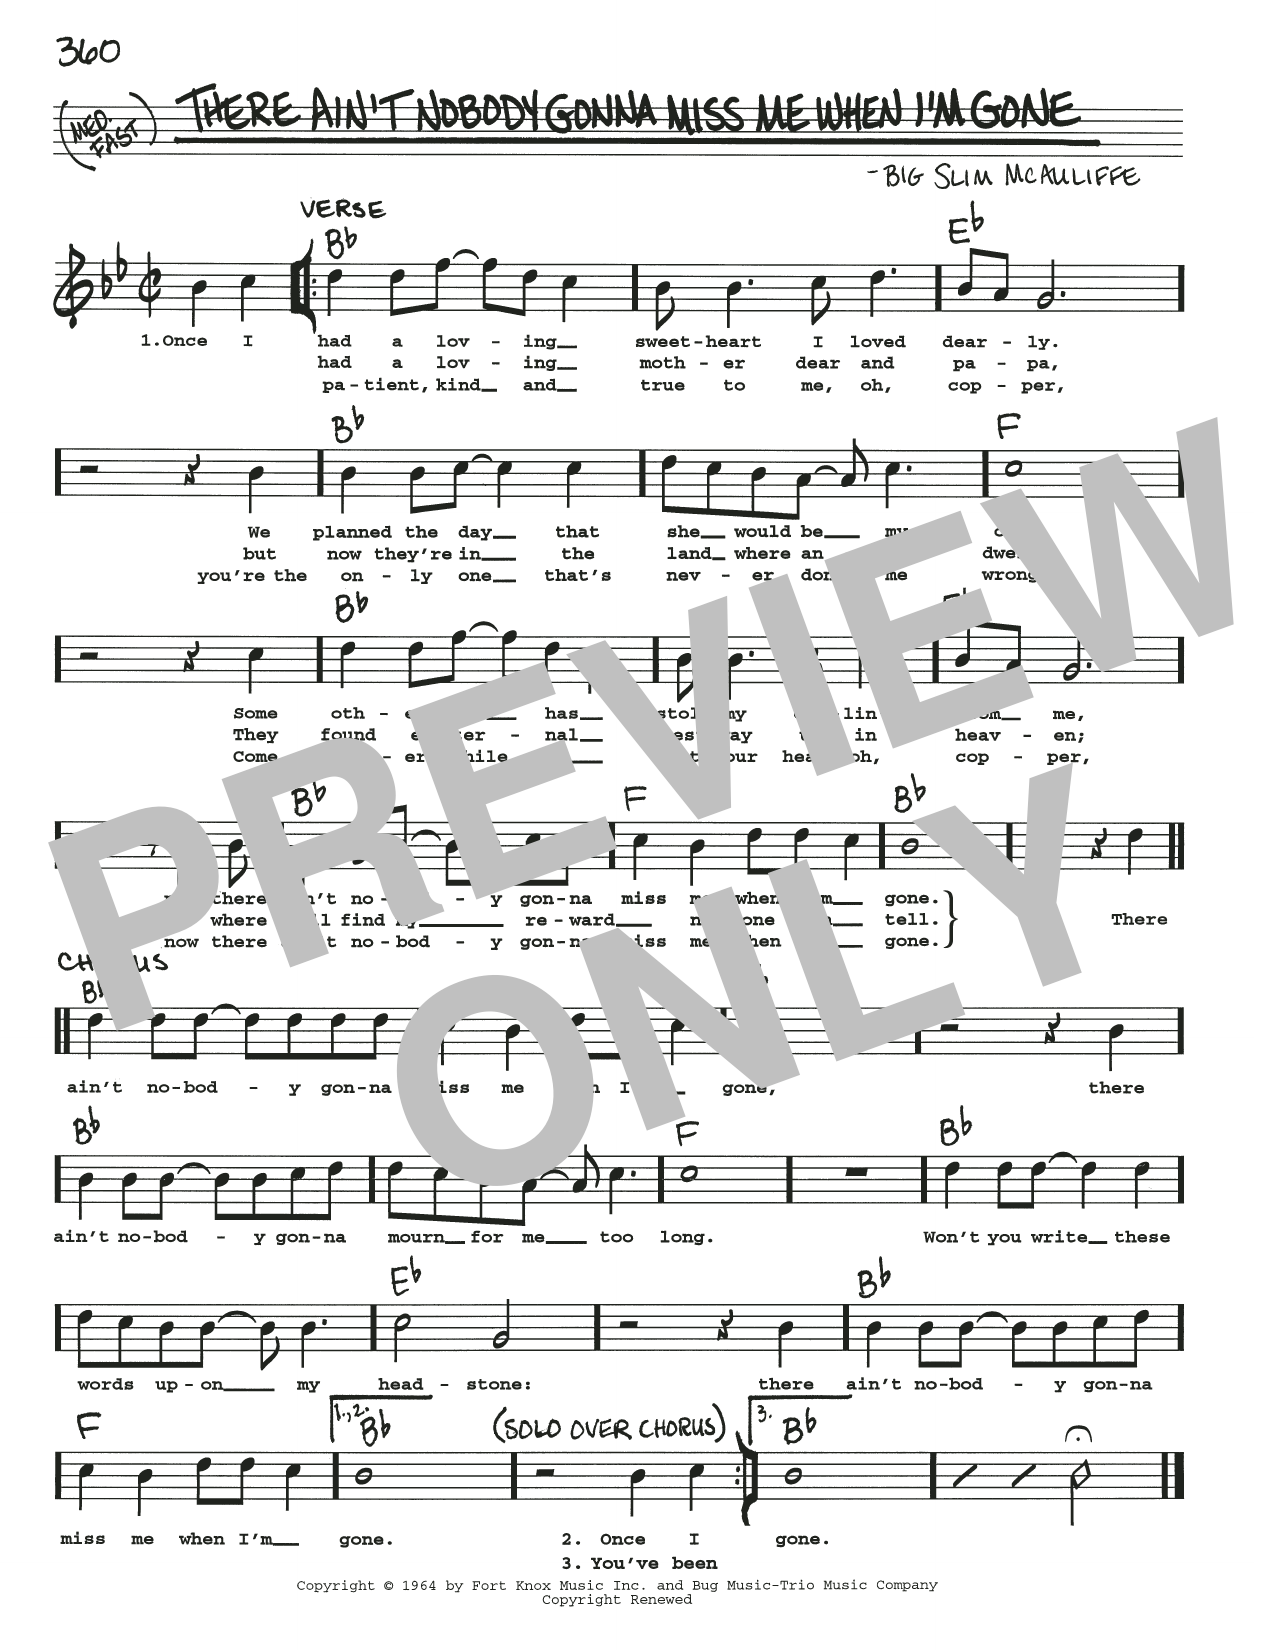 Download Big Slim McAuliffe There Ain't Nobody Gonna Miss Me When I Sheet Music